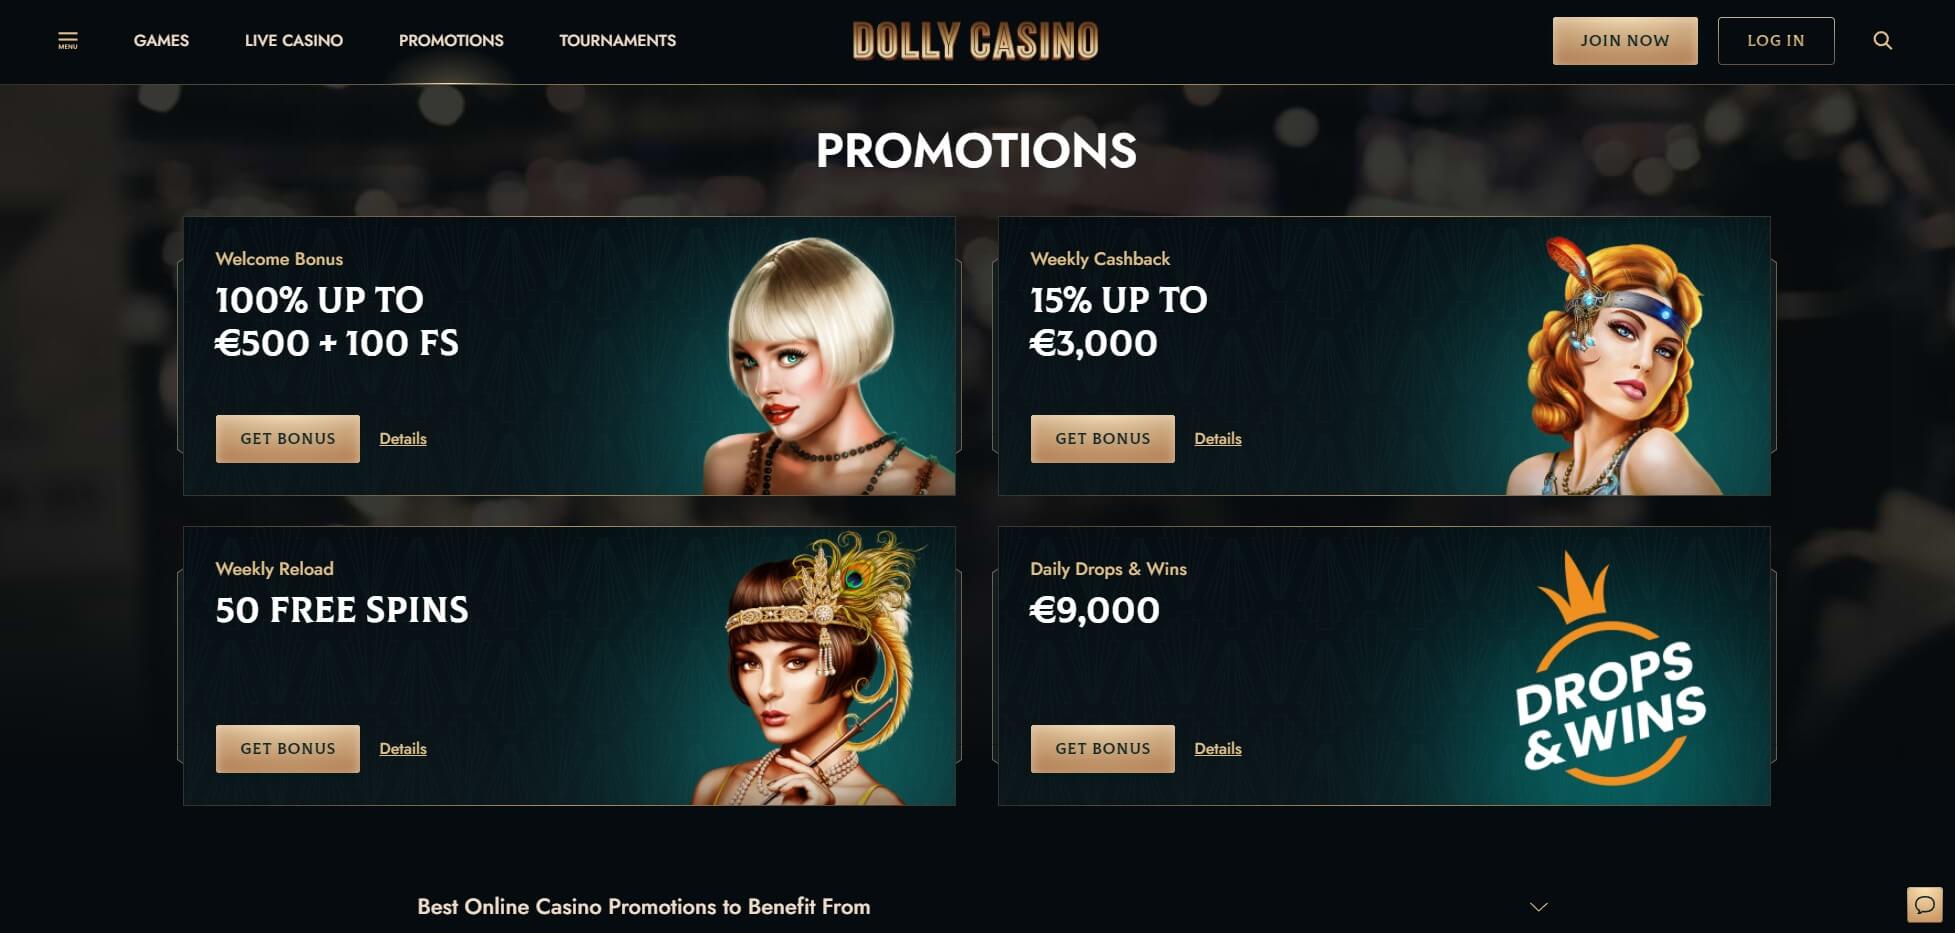 Promotions at Dolly Casino